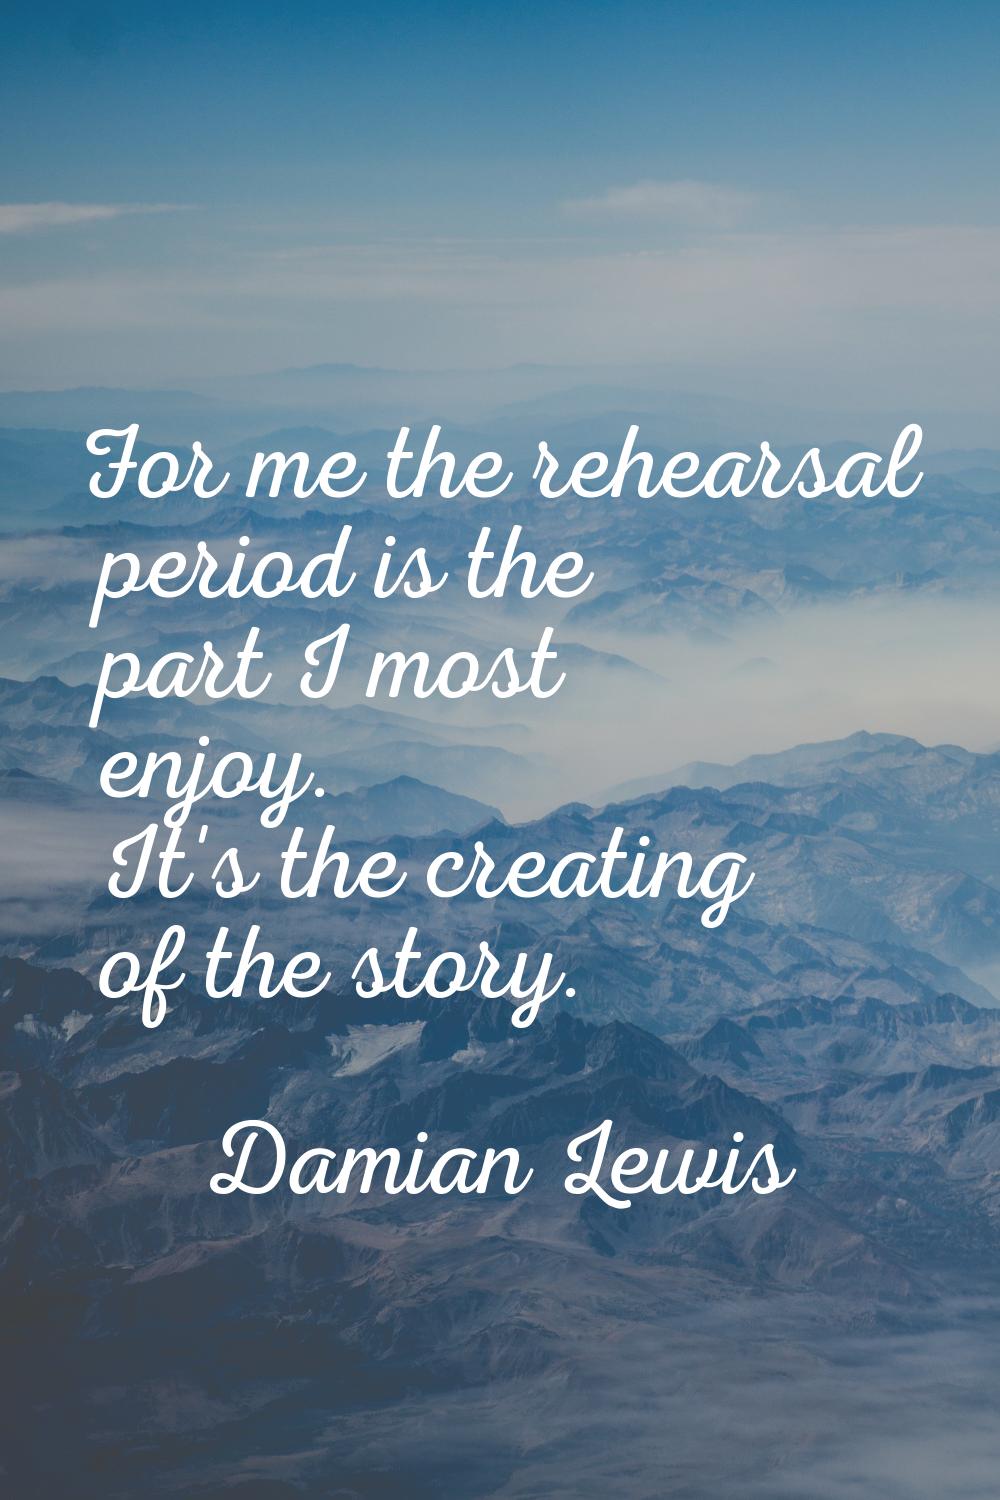 For me the rehearsal period is the part I most enjoy. It's the creating of the story.